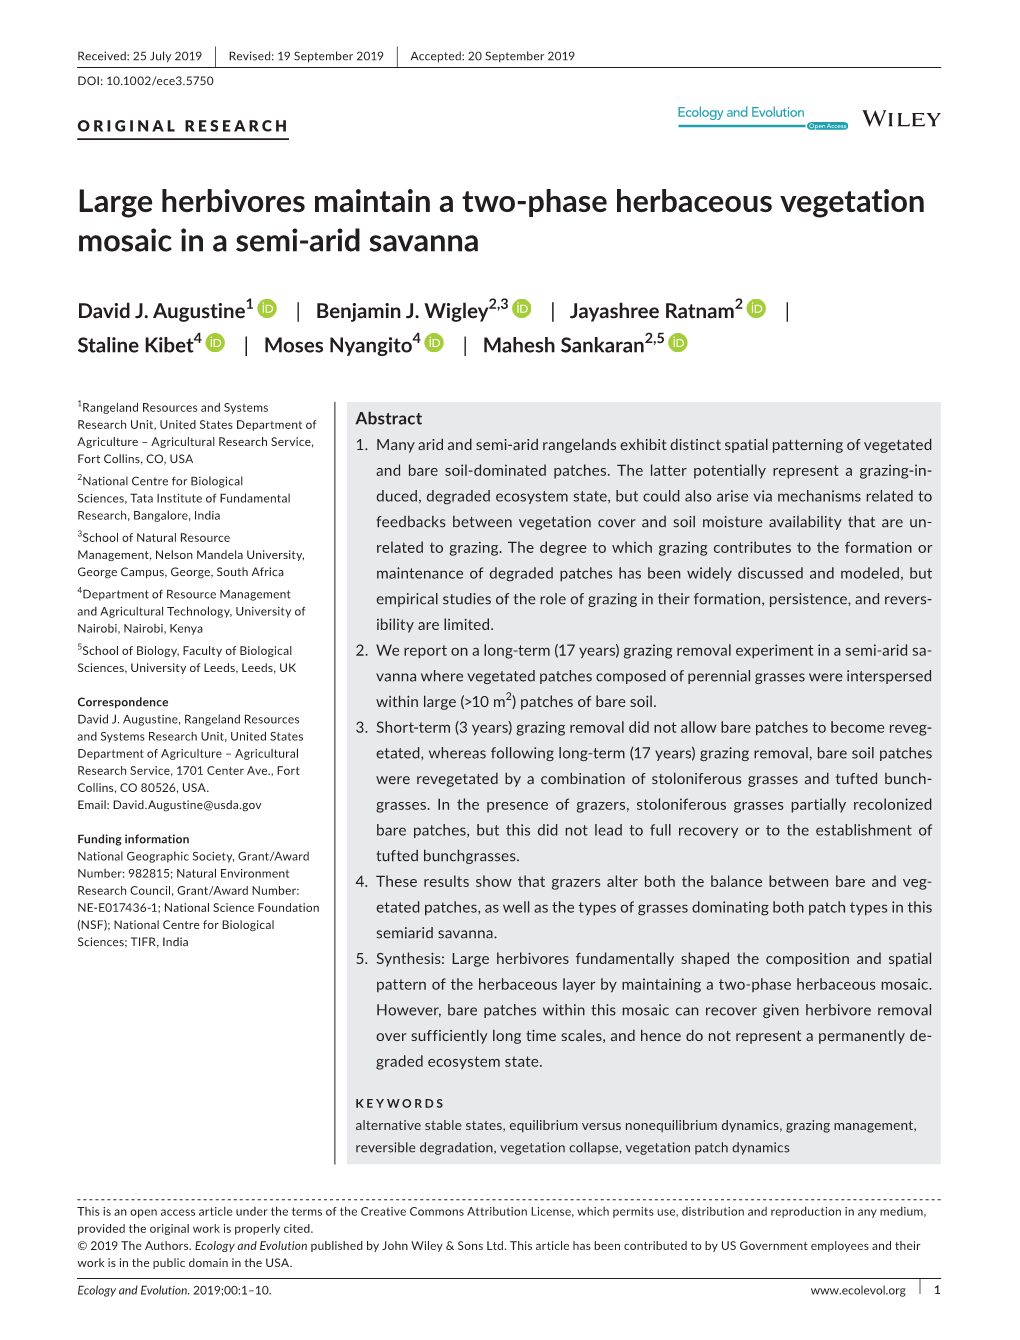 Large Herbivores Maintain a Two‐Phase Herbaceous Vegetation Mosaic in a Semi‐Arid Savanna